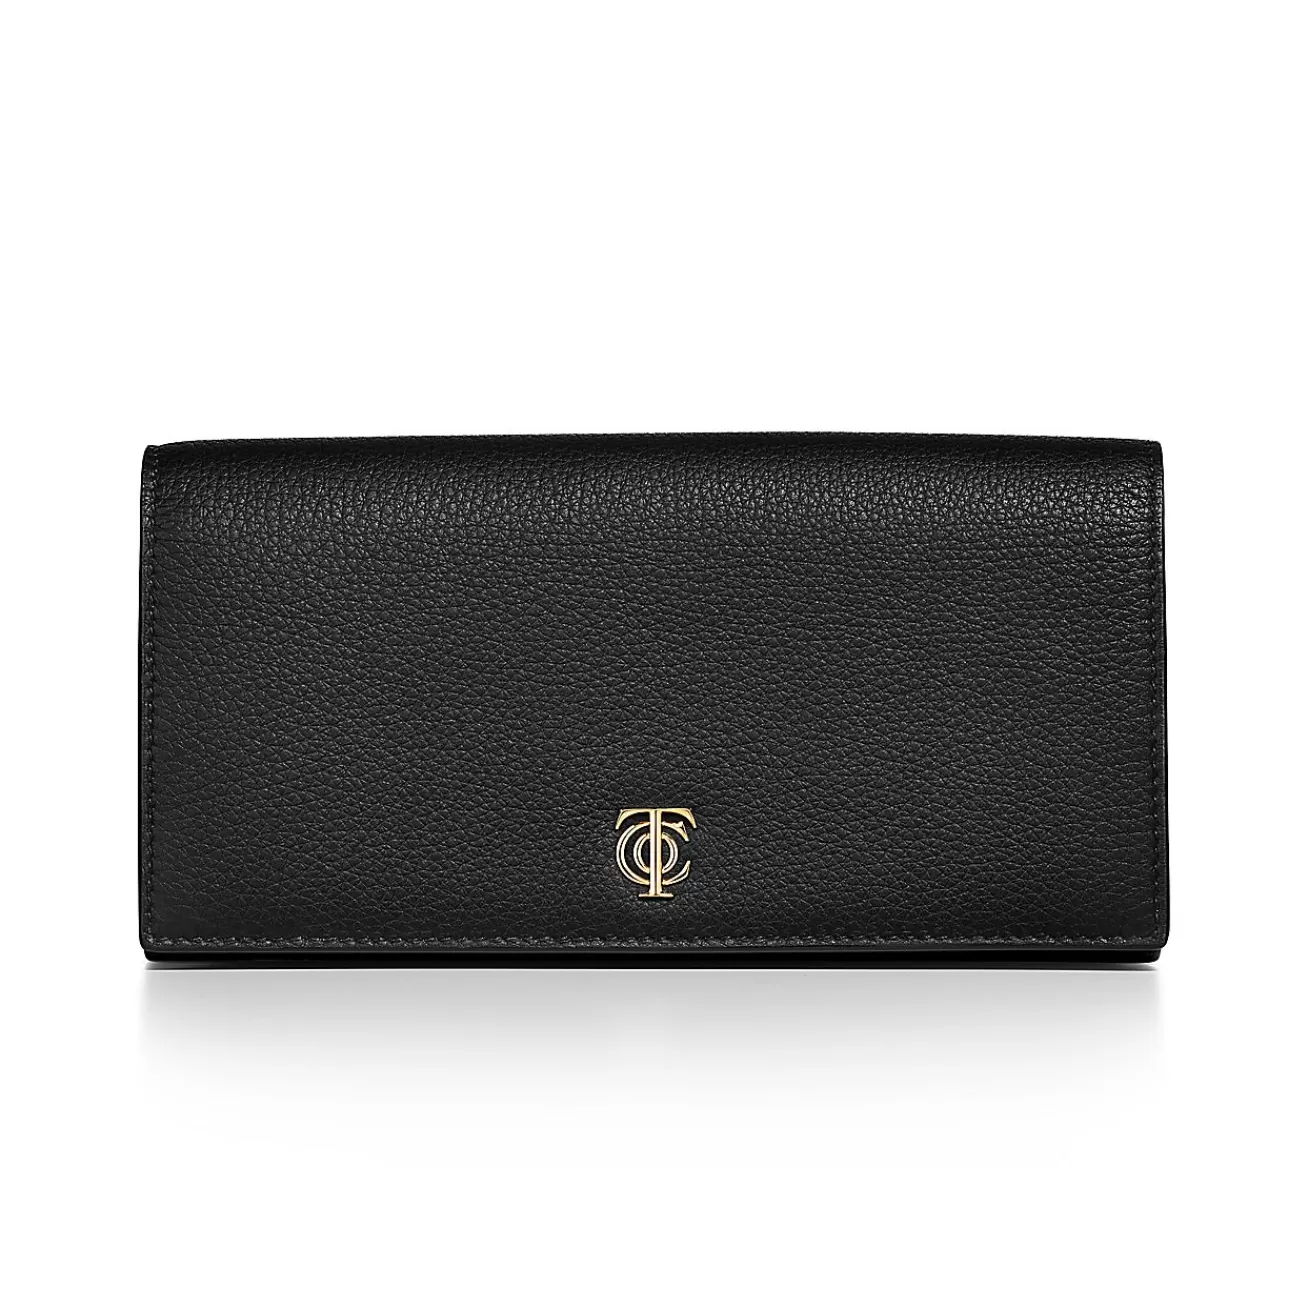 Tiffany & Co. T&CO. Flap Continental Wallet in Black Leather | ^Women Small Leather Goods | Women's Accessories